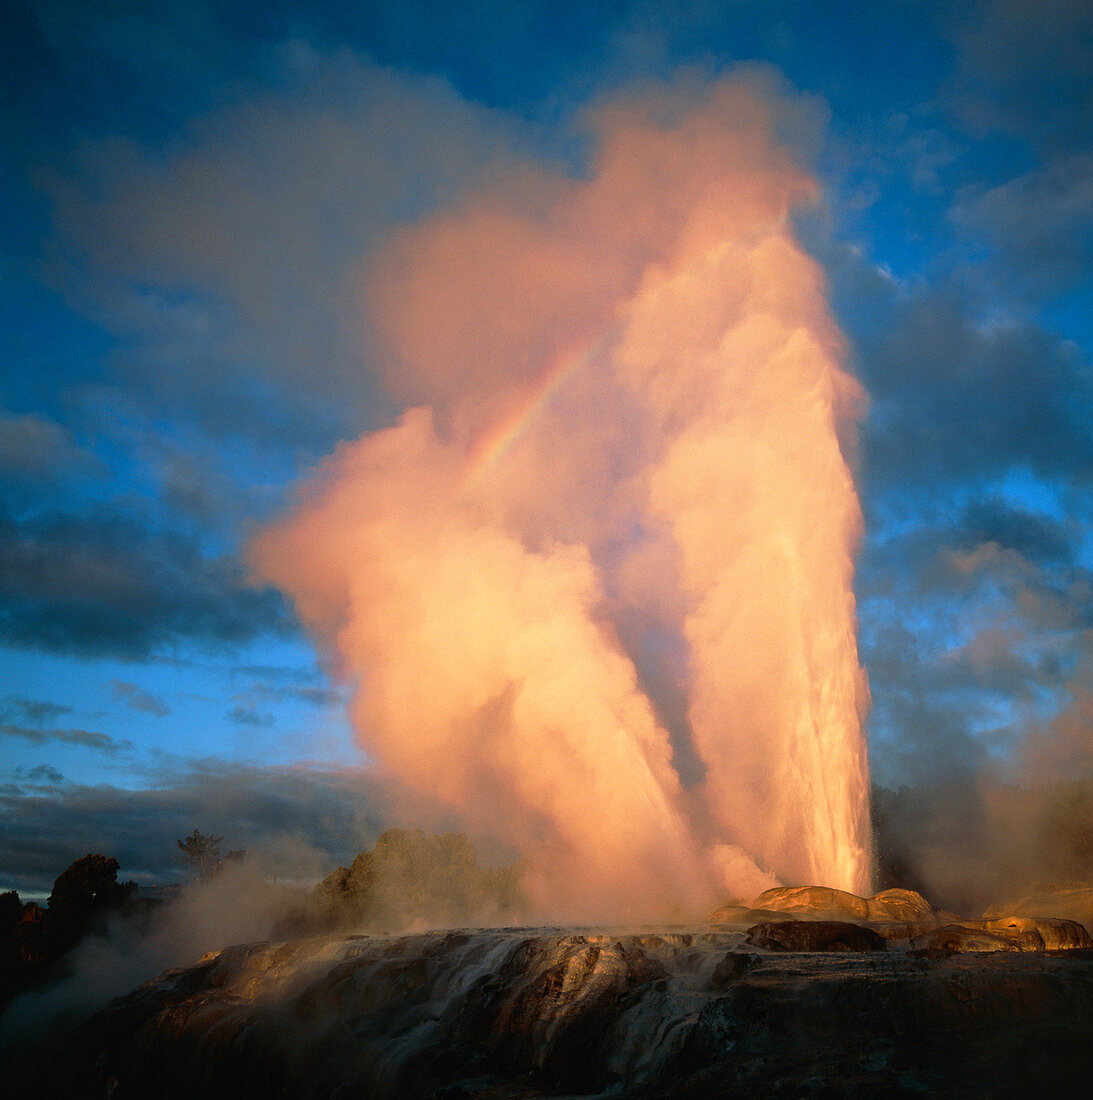 Pohutu and Prince of Wales Feathers geysers